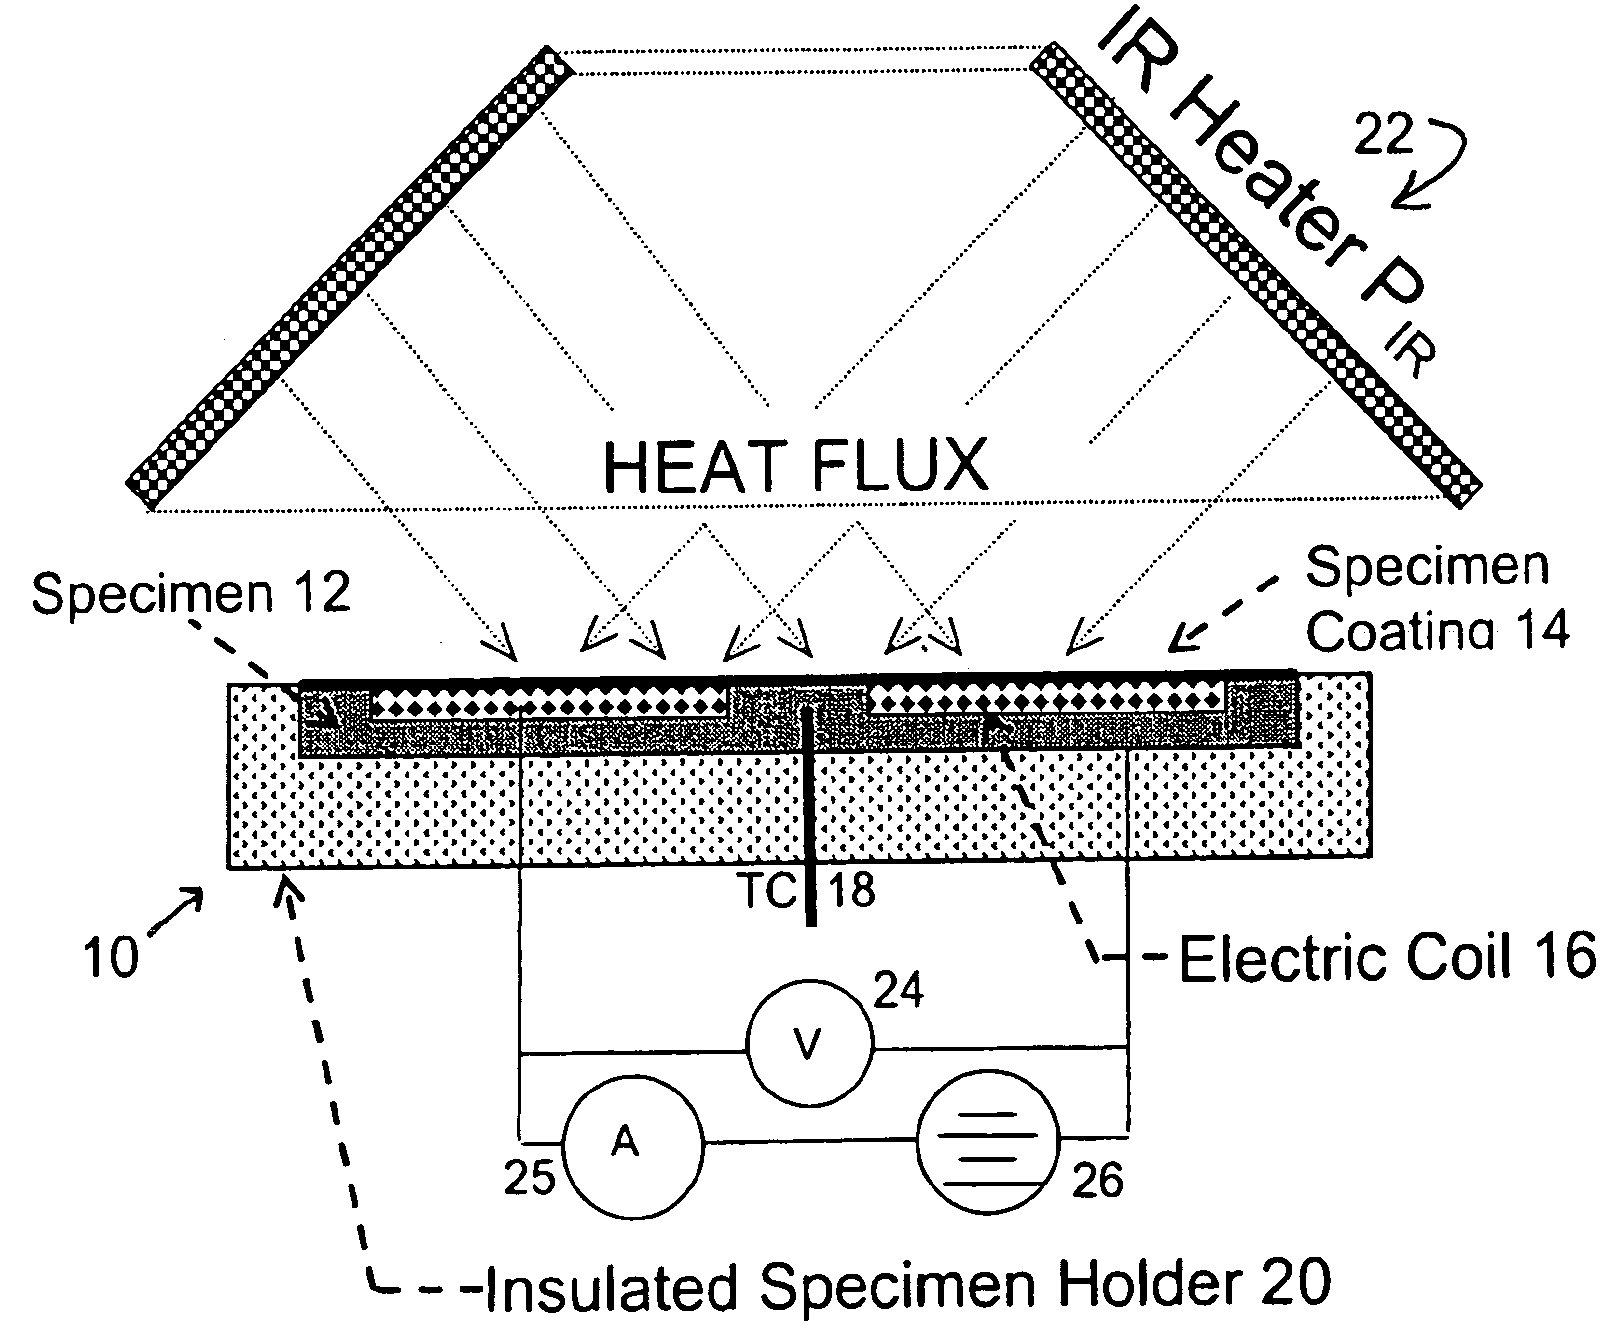 Device and method for measuring absorbed heat flux in a fire test apparatus